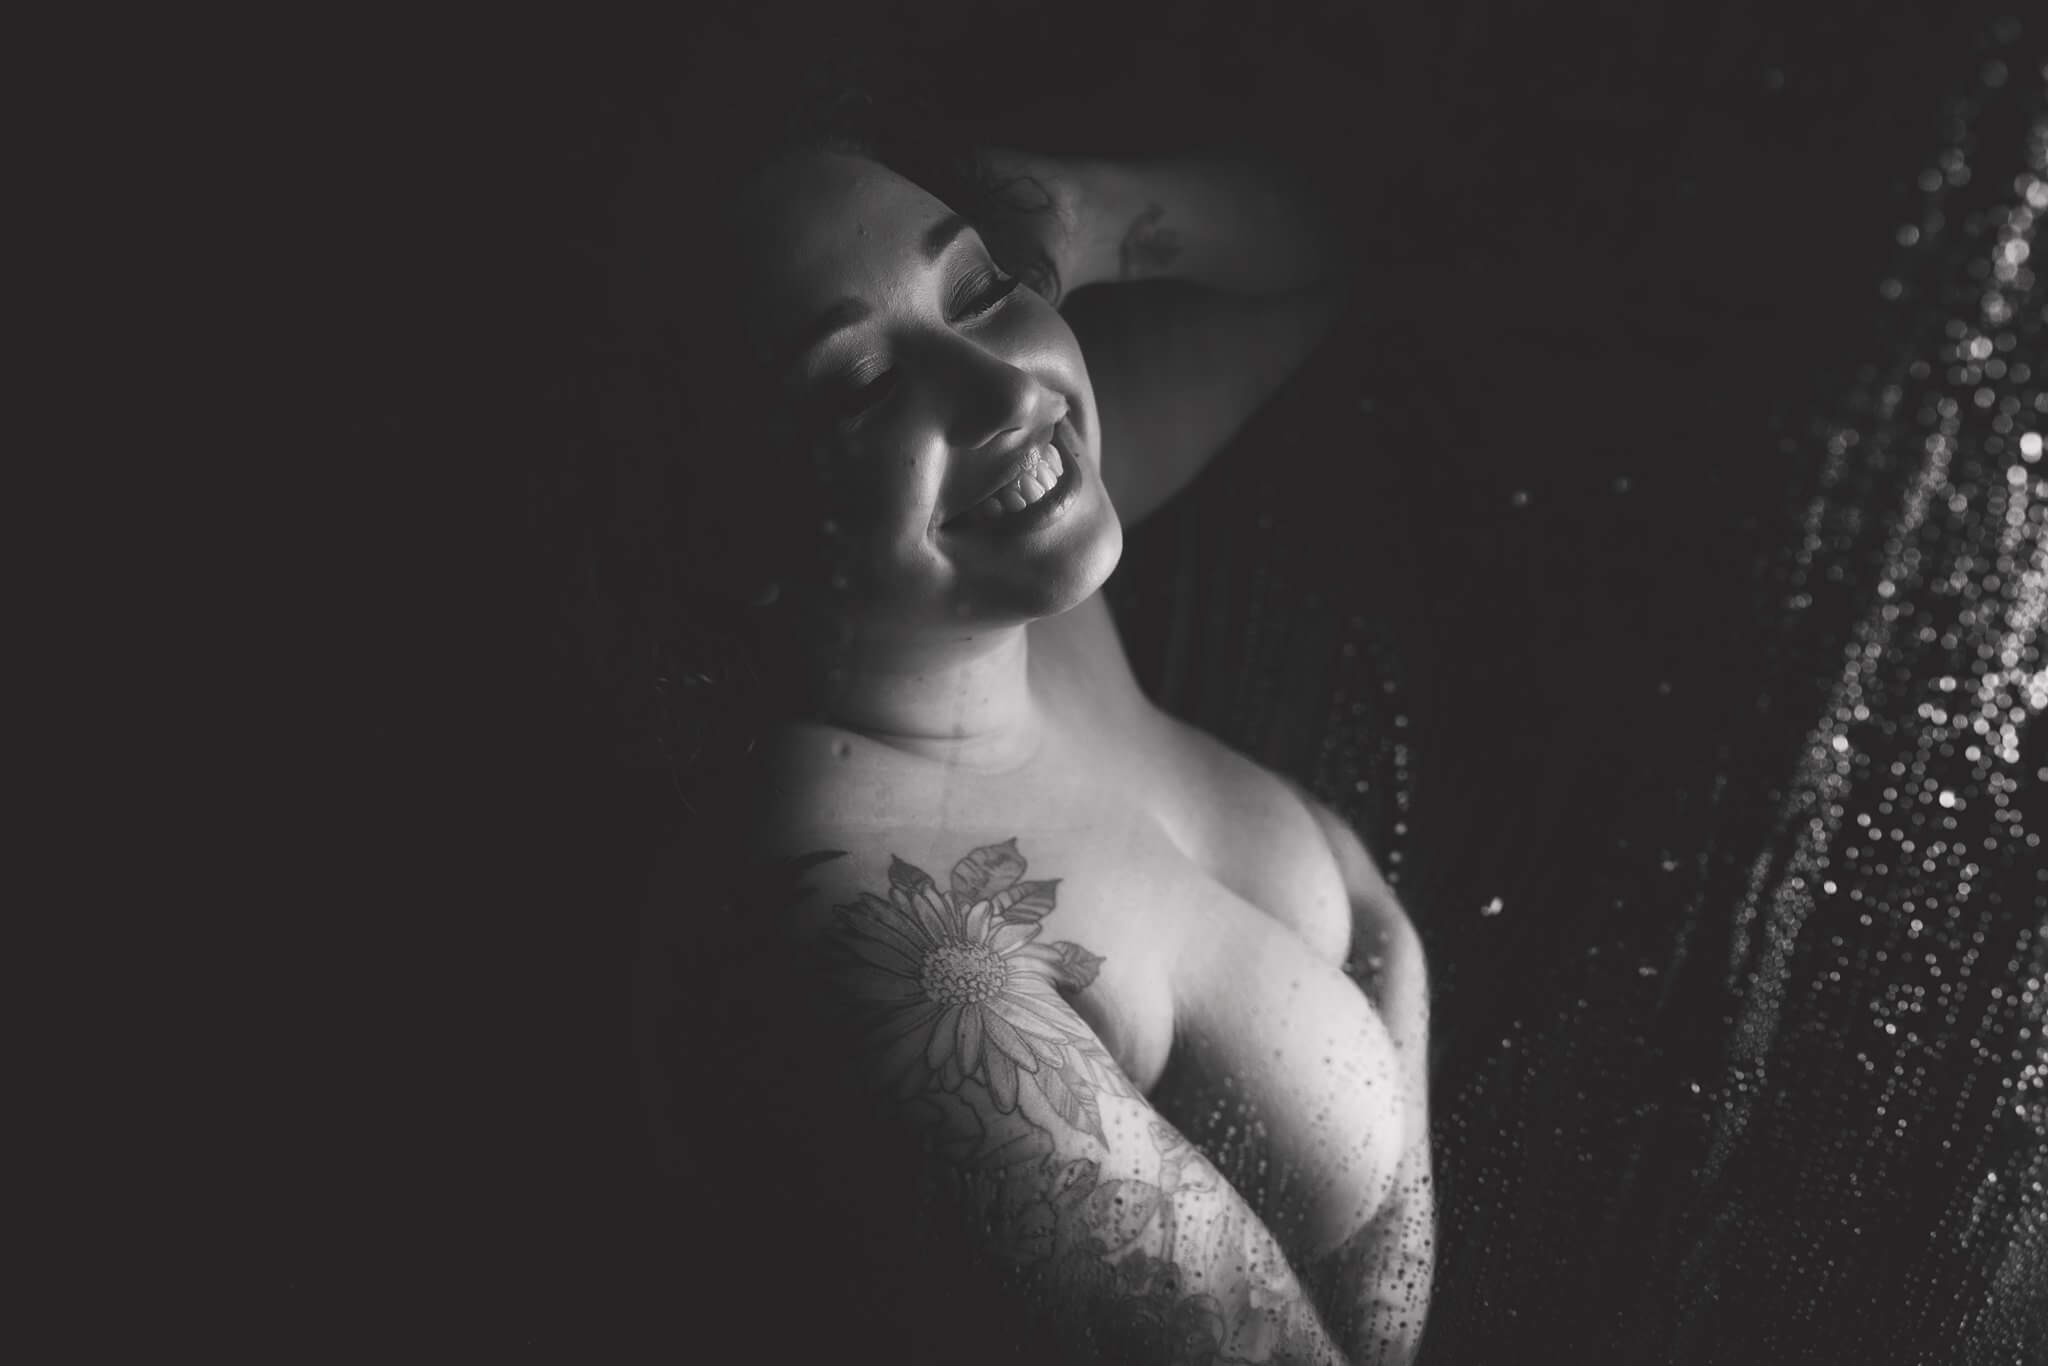 Photography by Toronto Photographer Shanna Parker Black & White photo of a woman smiling in a shower with tattoos on her right arm and shoulder